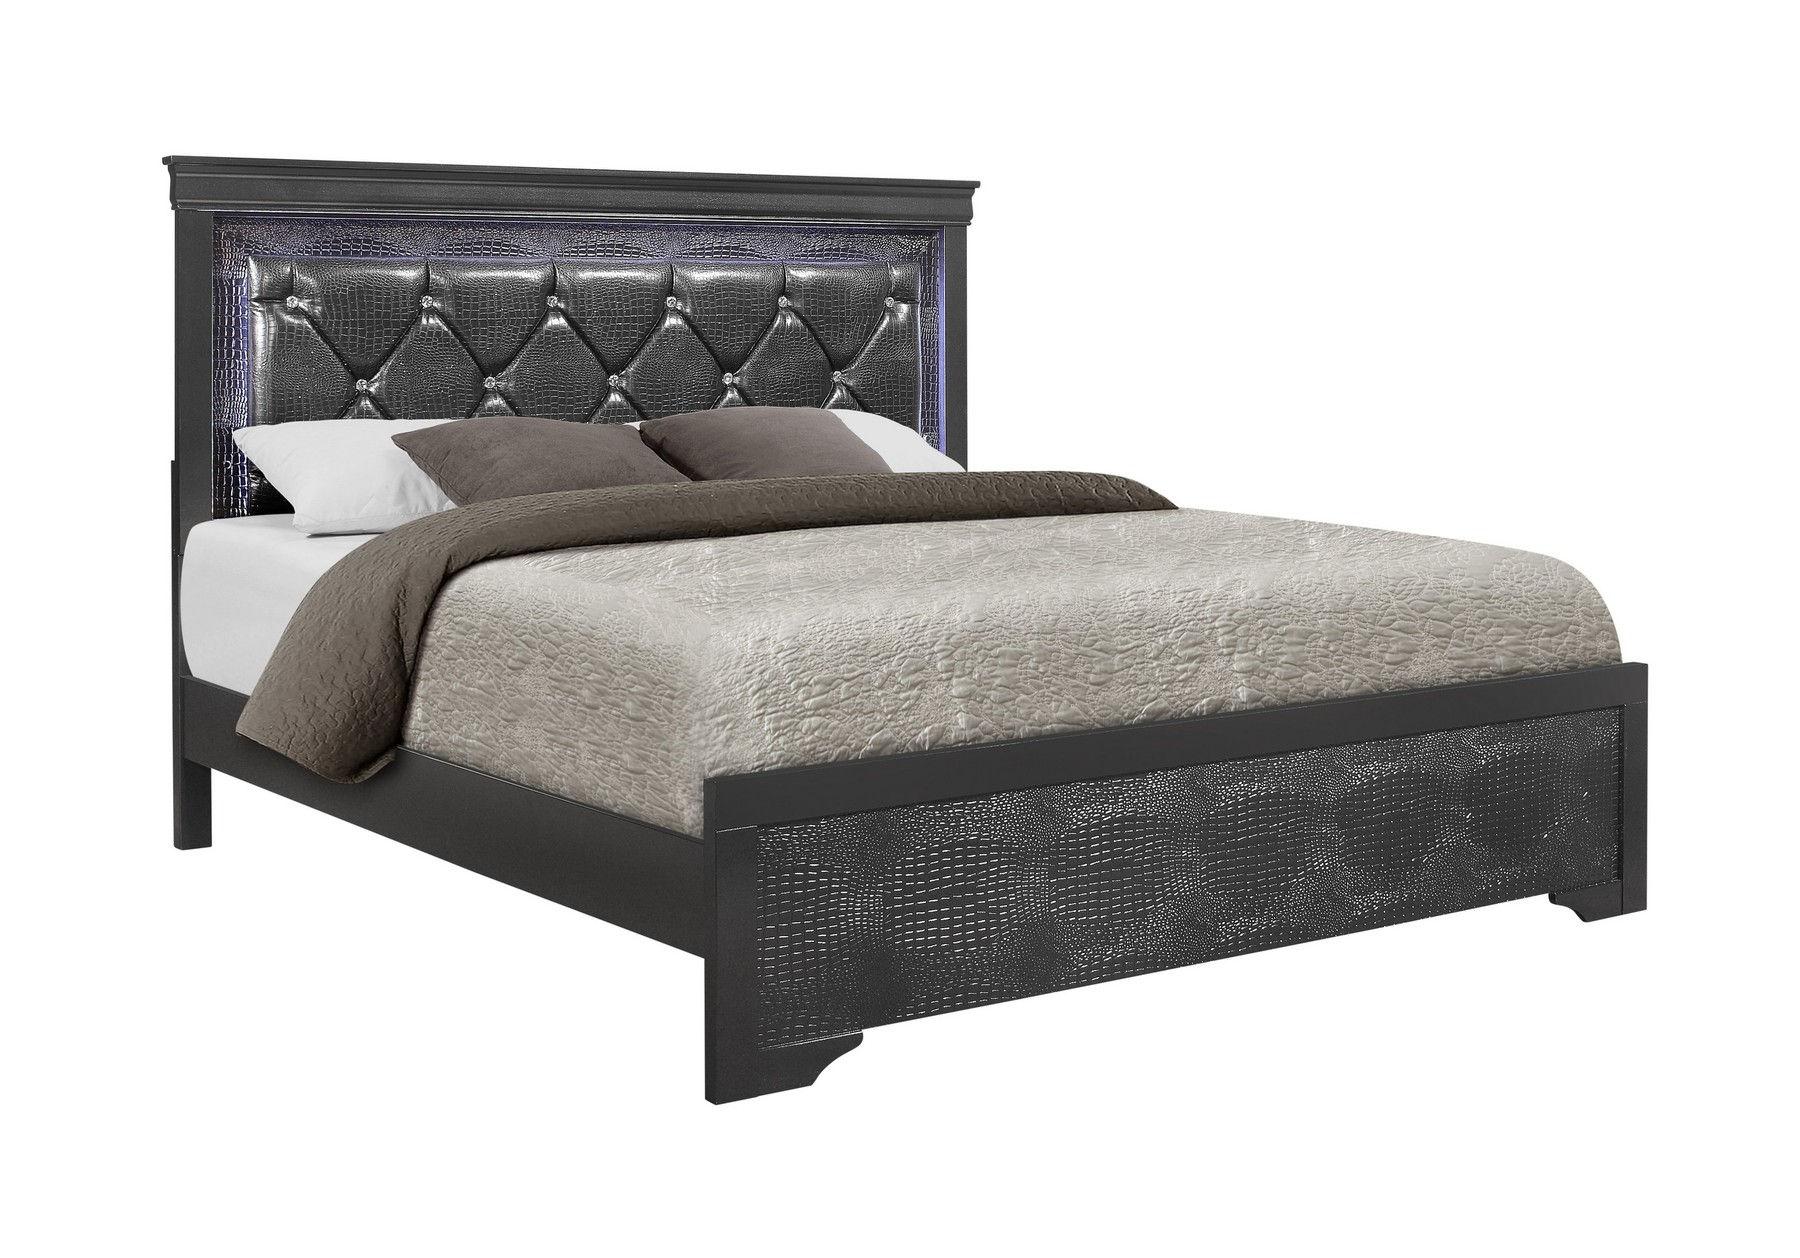 

    
POMPEI Modern Gray Crocodile Leather Insert King Bed Global US
